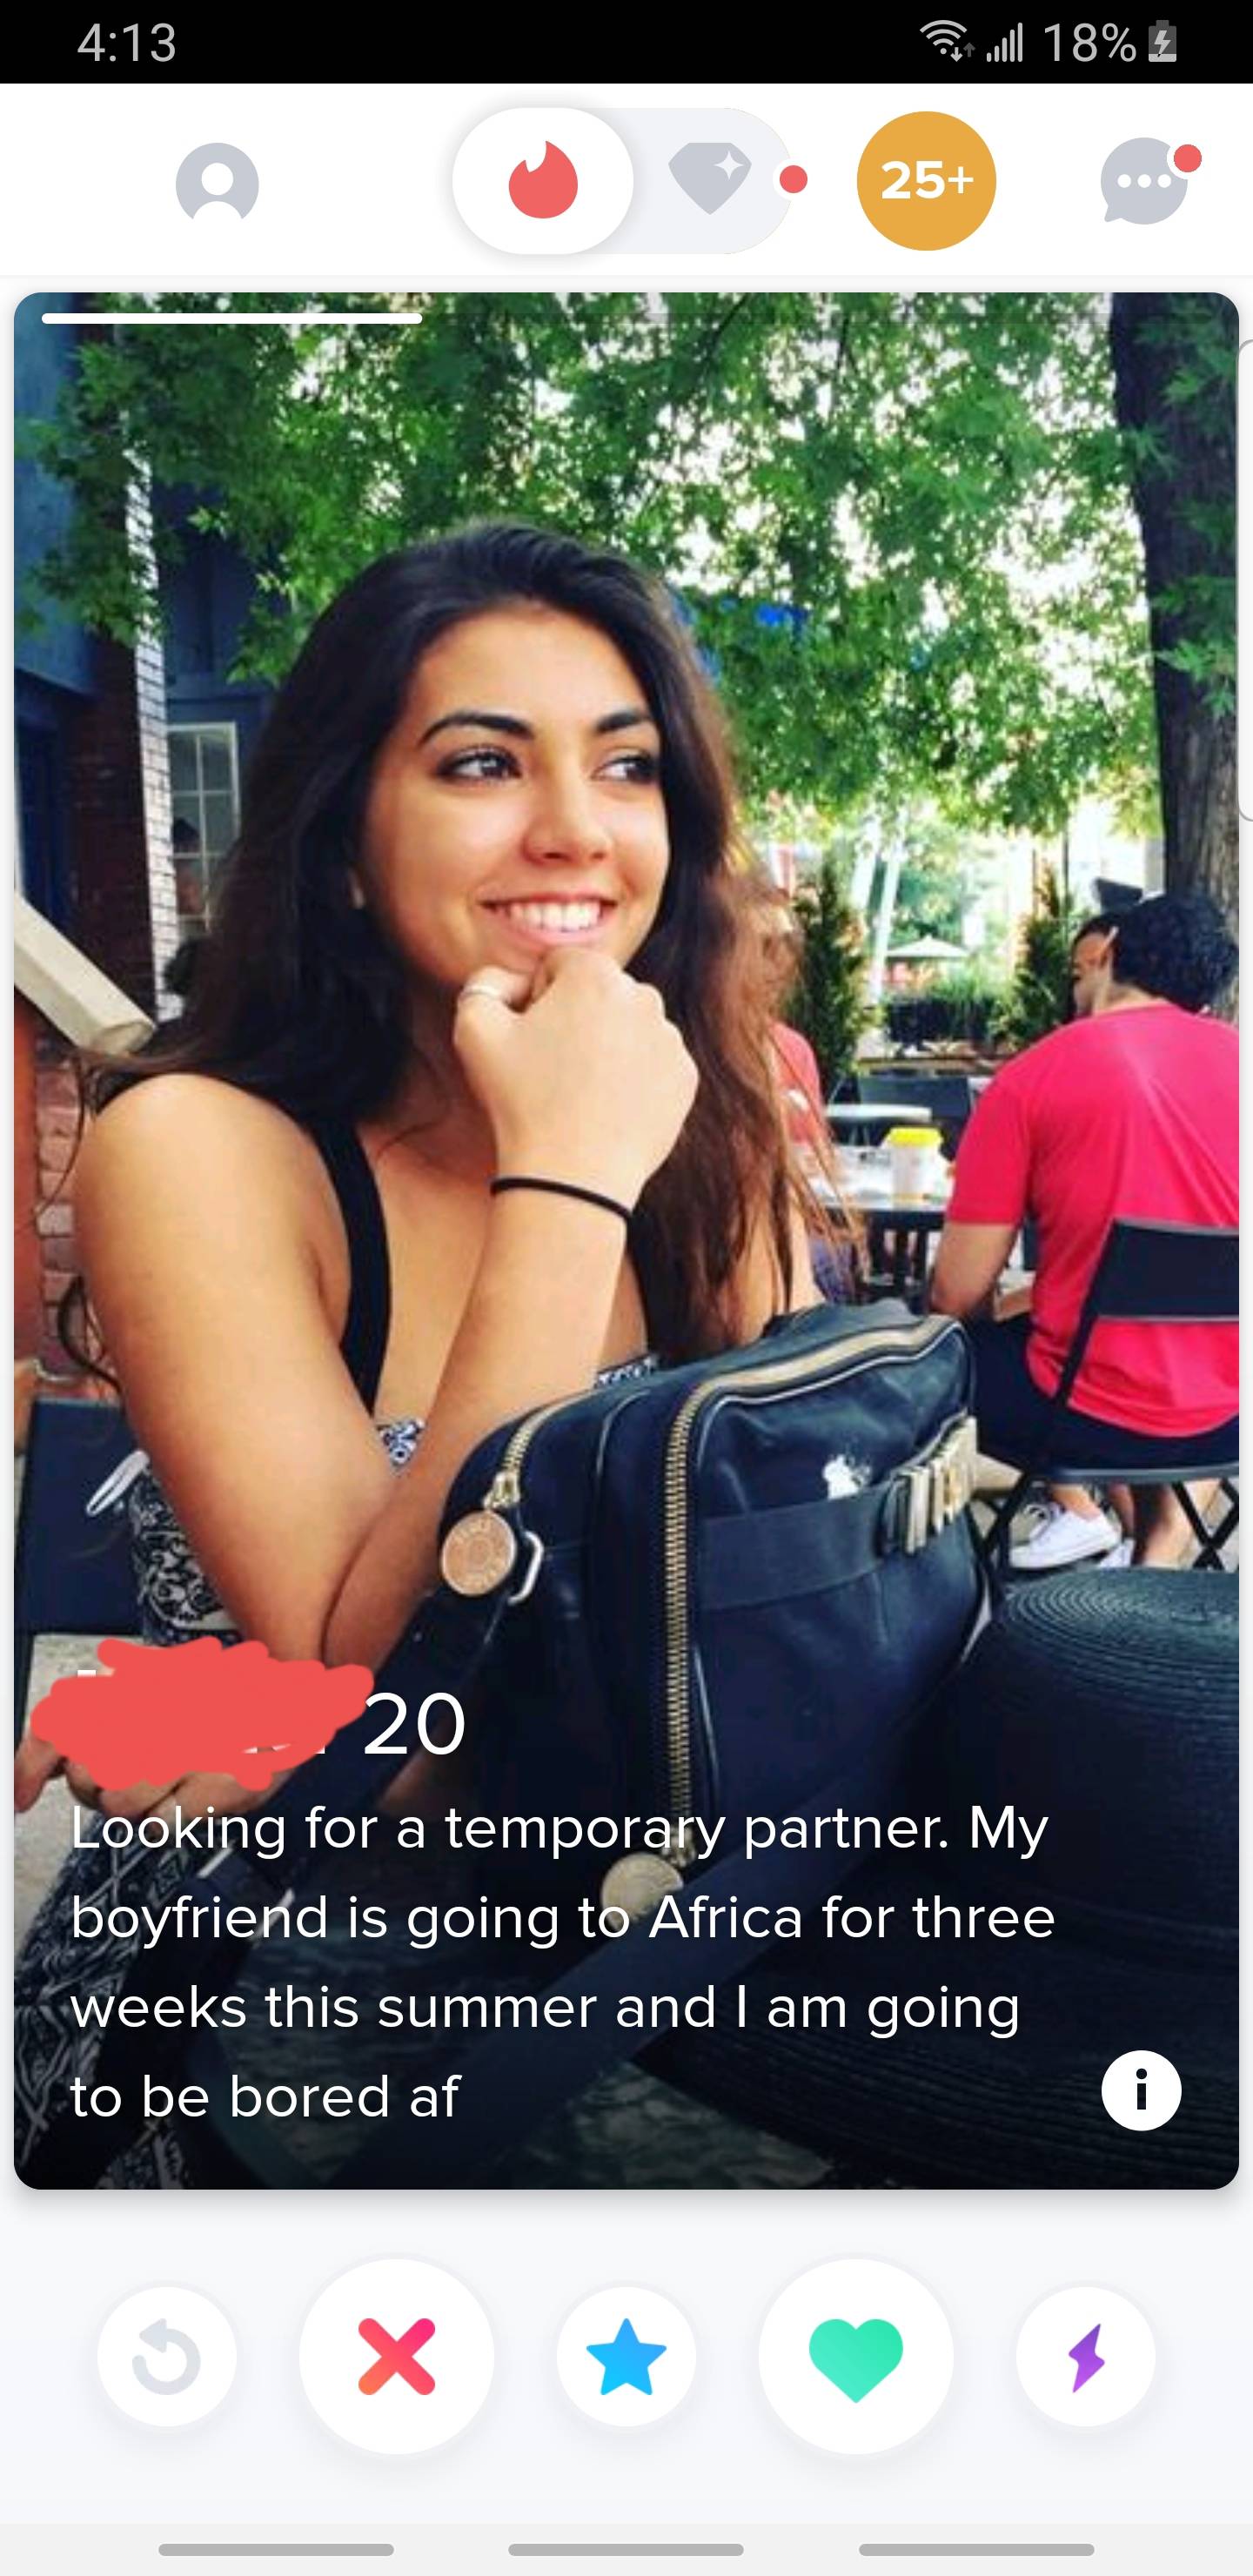 tinder - poster - Su Jill 18% 25 Www 20 Looking for a temporary partner. My boyfriend is going to Africa for three weeks this summer and I am going to be bored af